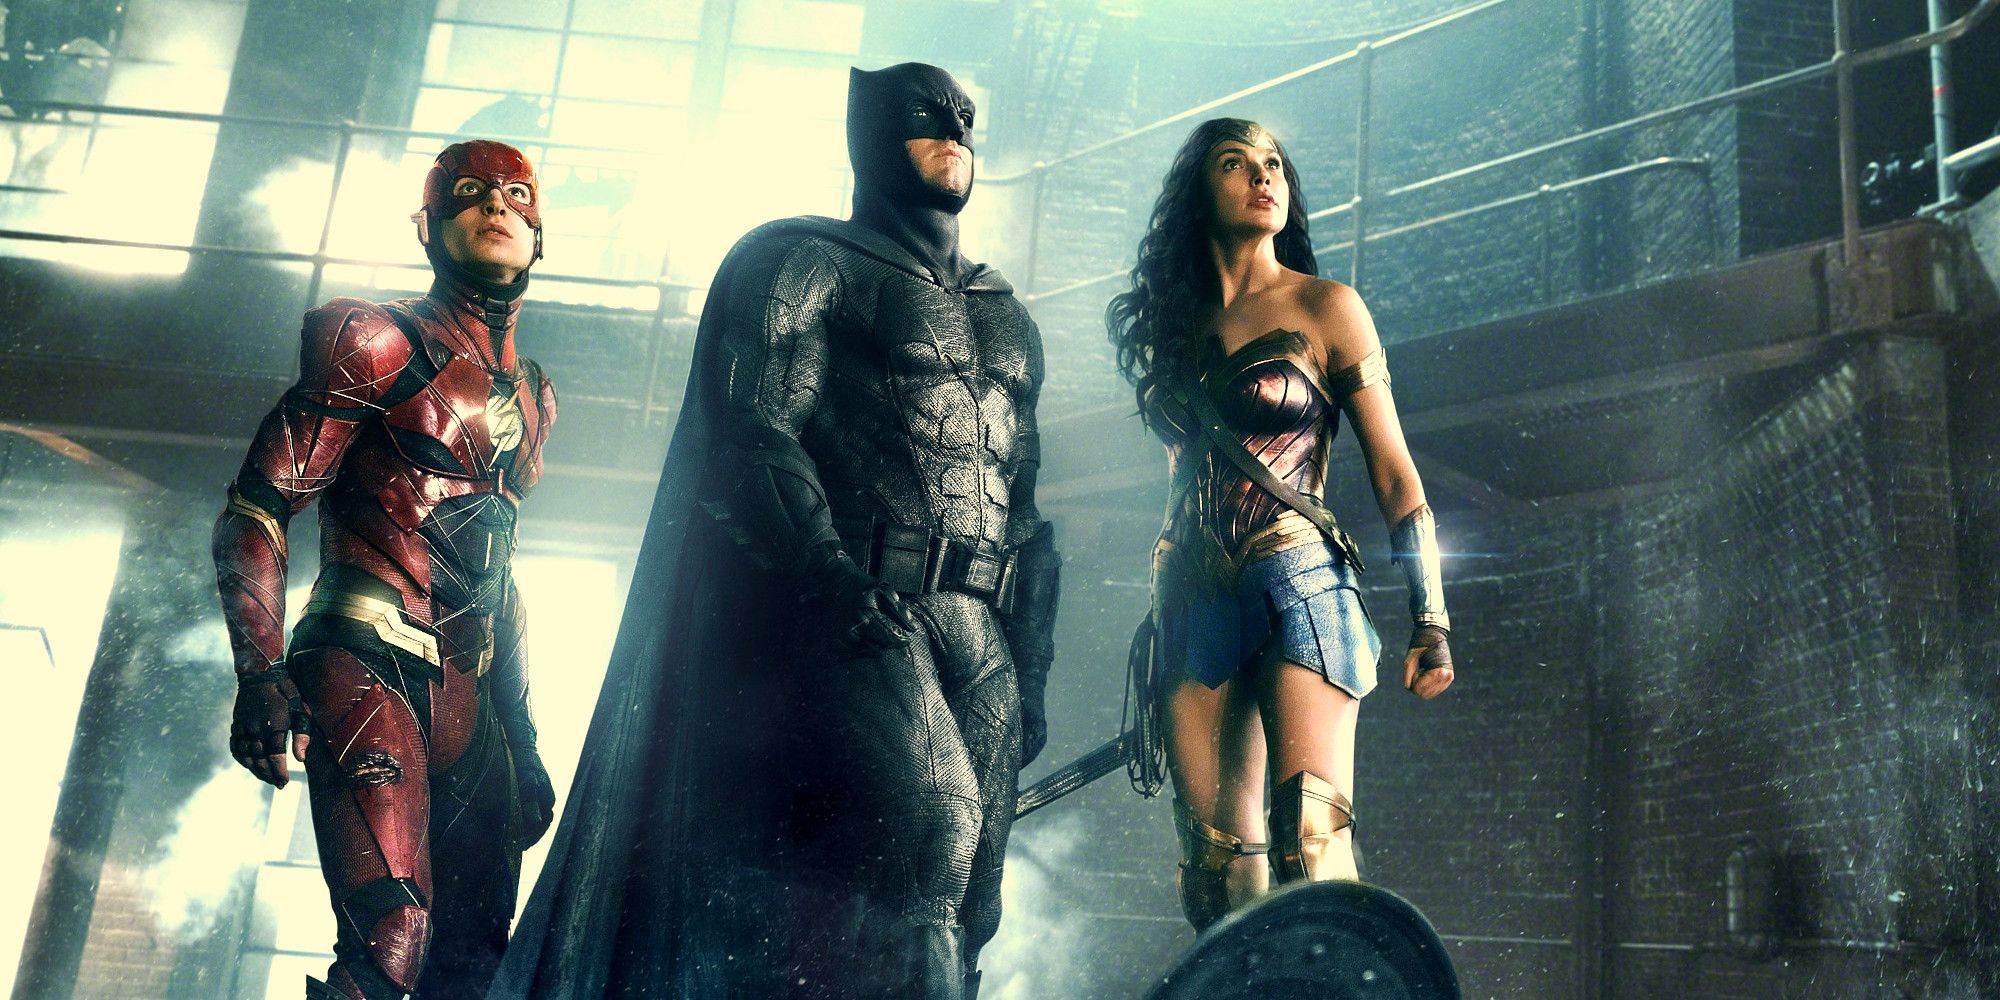 The DCEU Justice League movie from 2017